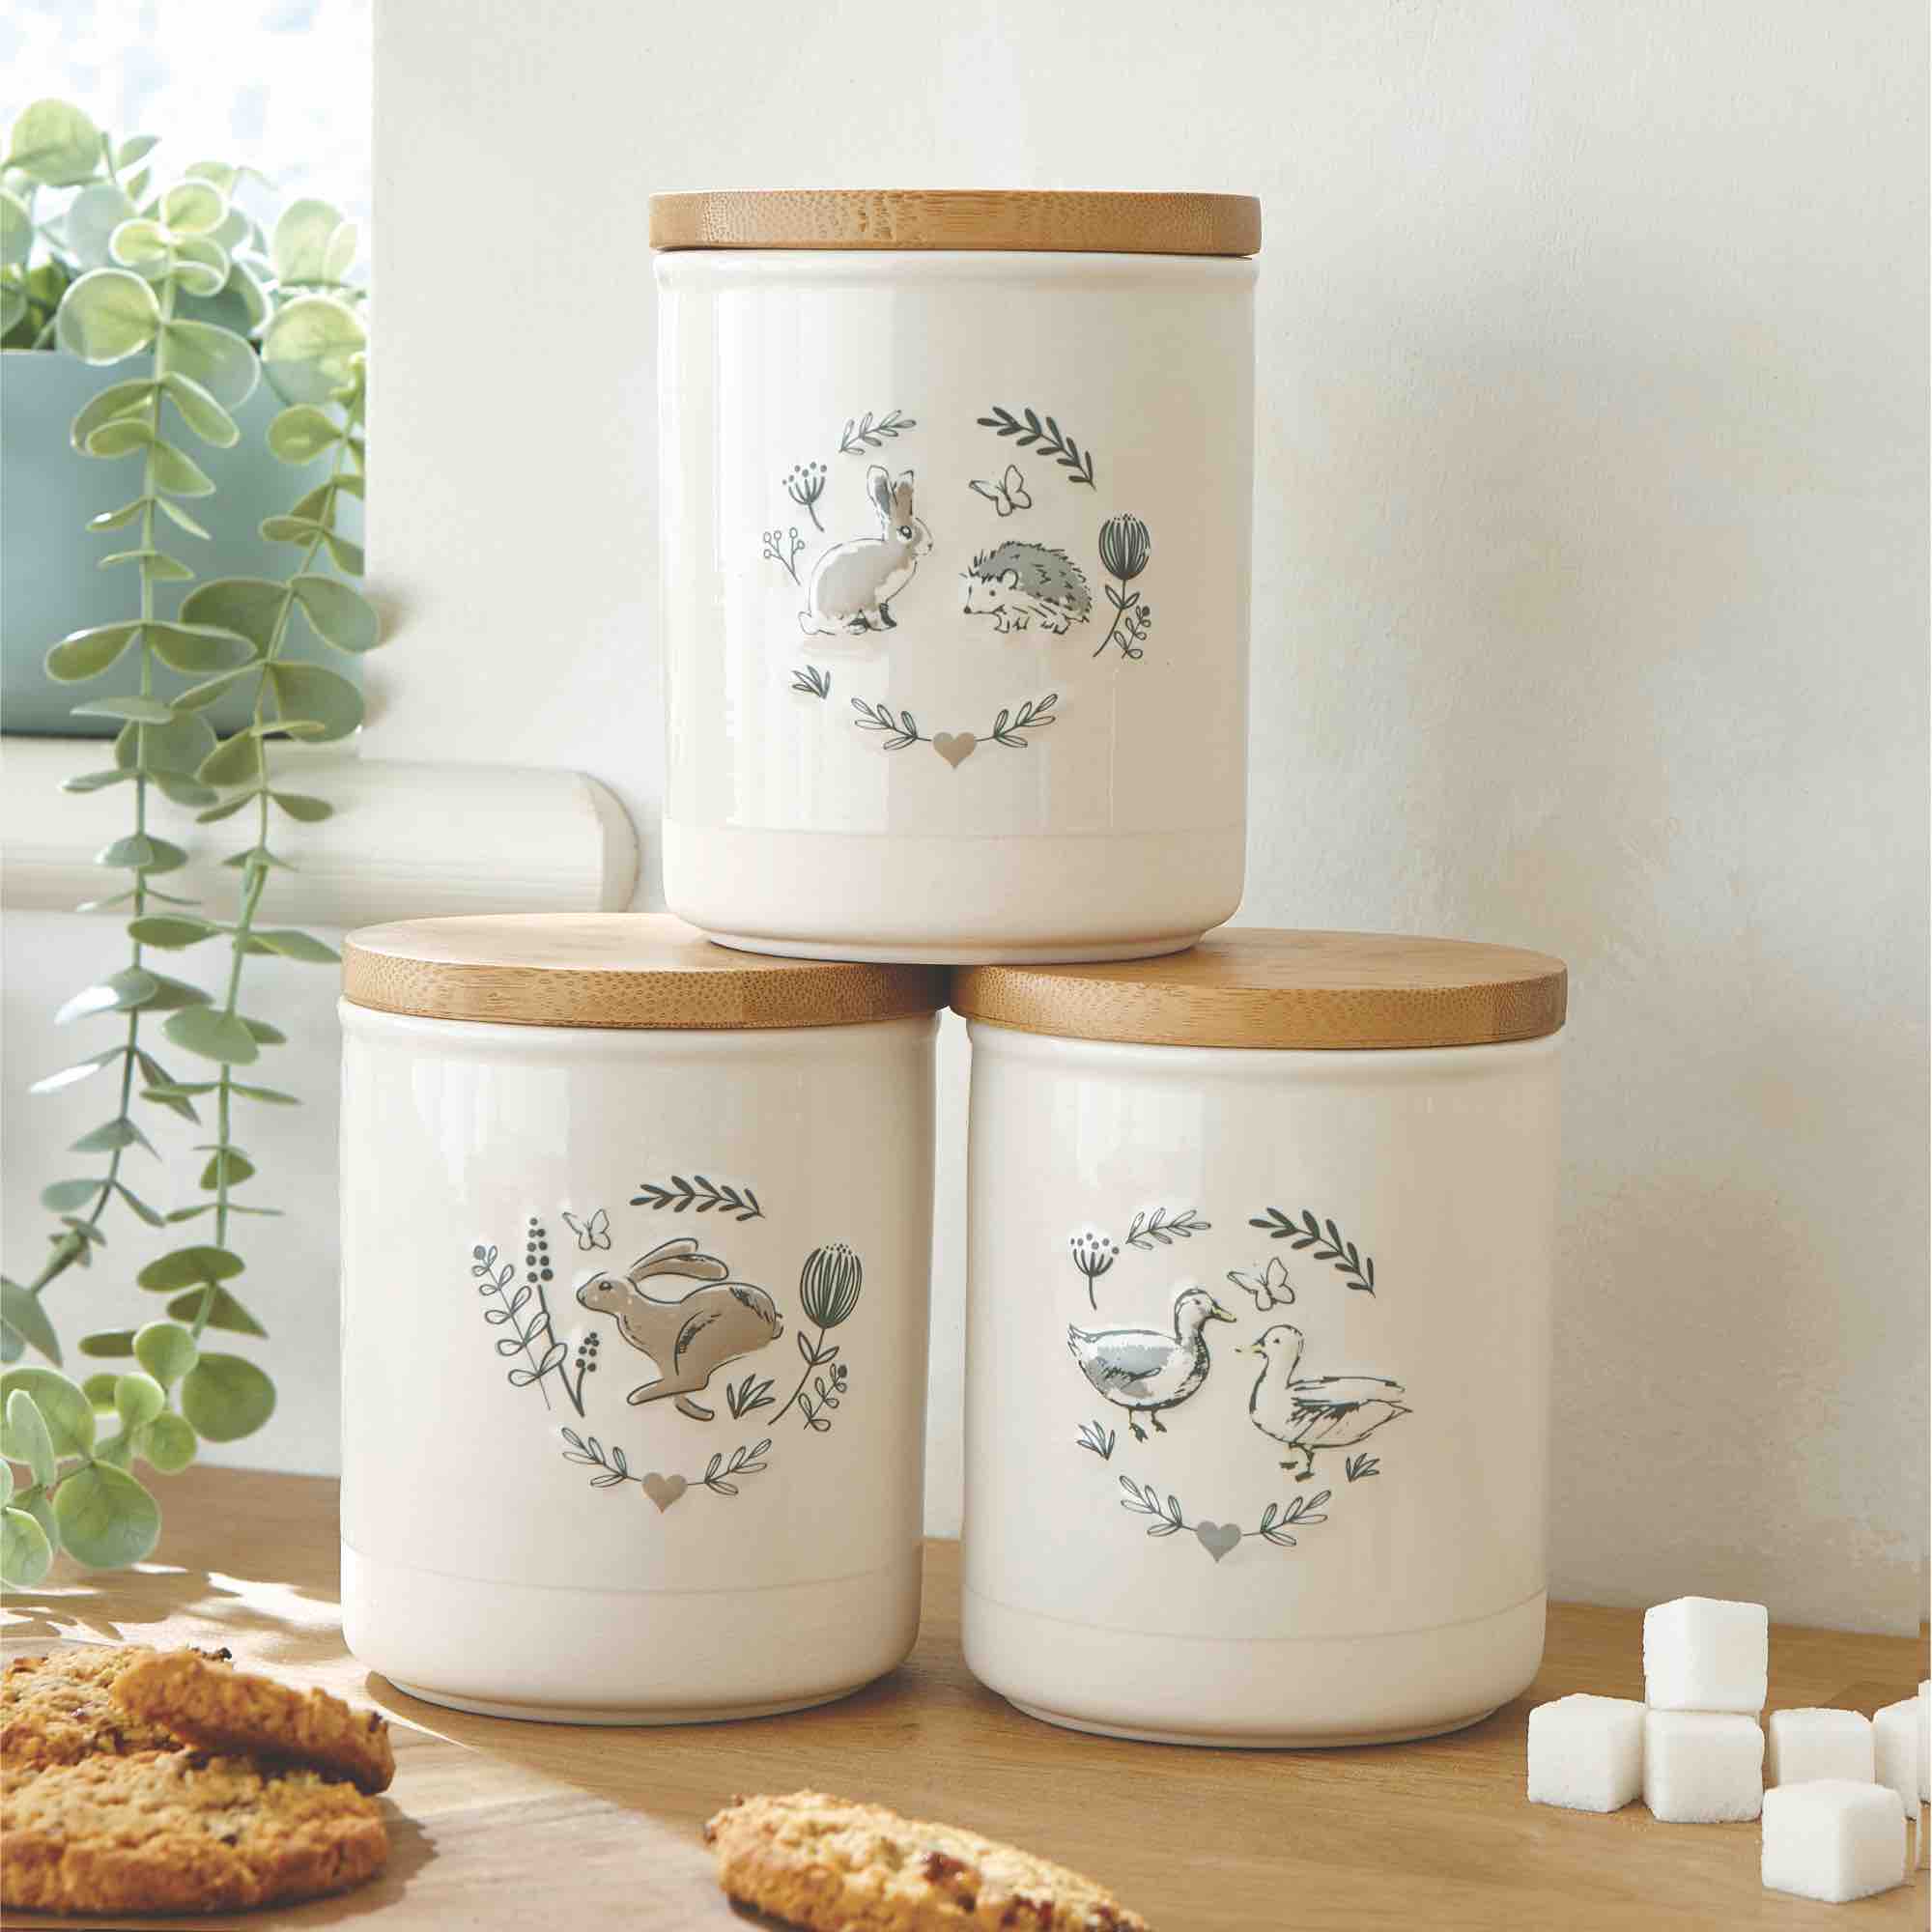 Country Animals Ceramic Sugar Canister